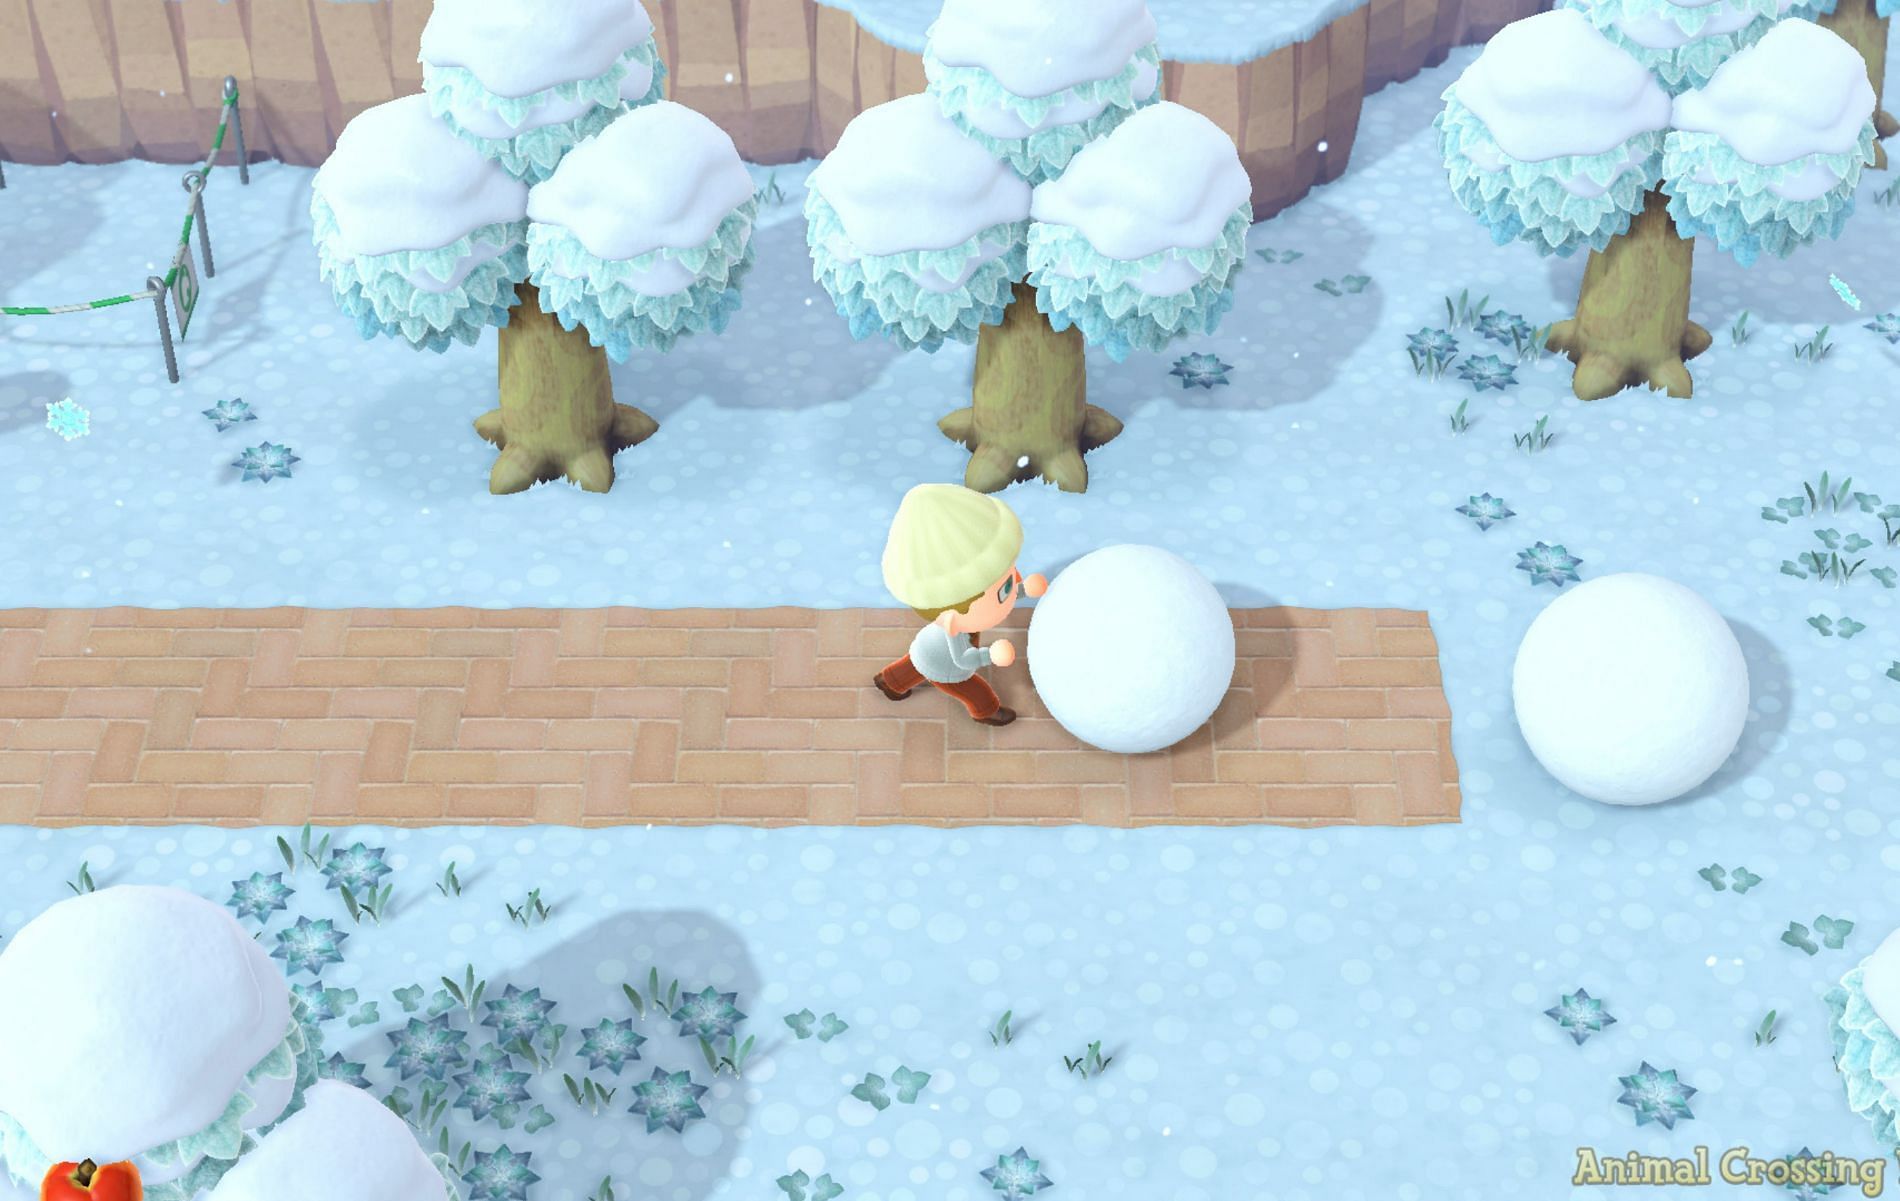 Building a Snowman in Animal Crossing: New Horizons(Image via Animal Crossing: New Horizons)